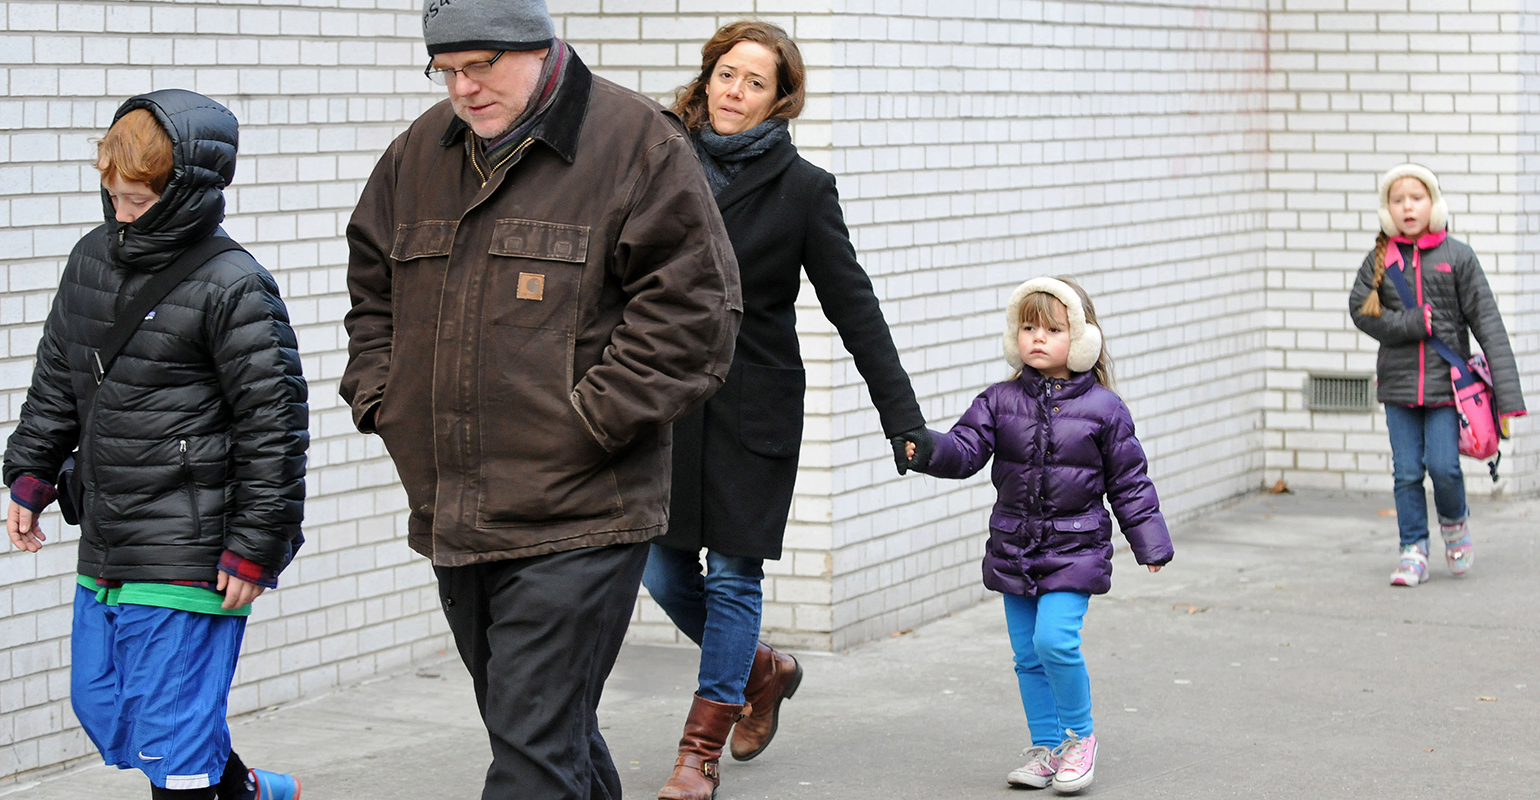 Philip Seymour Hoffman, Mimi O'Donnell and kids